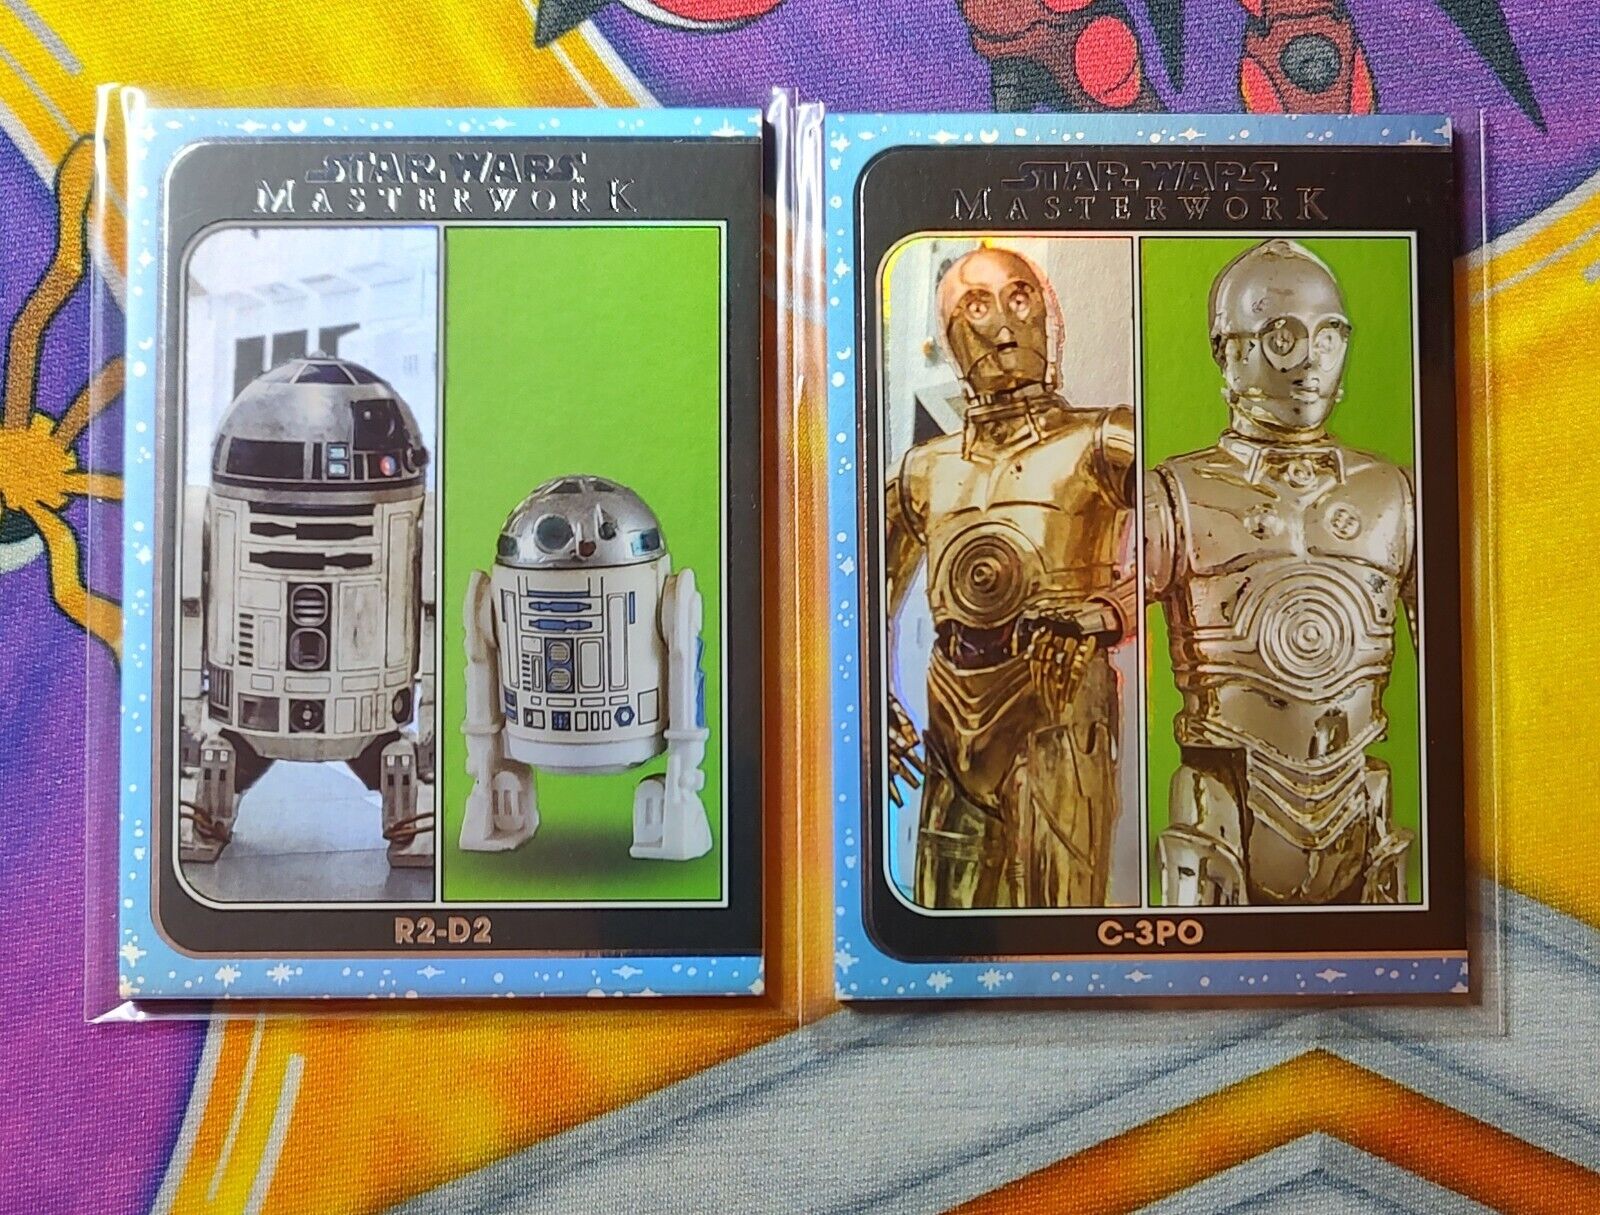 2021 Topps Star Wars Masterwork /299 R2-D2 / C-3PO Out Of The Box Insert Card